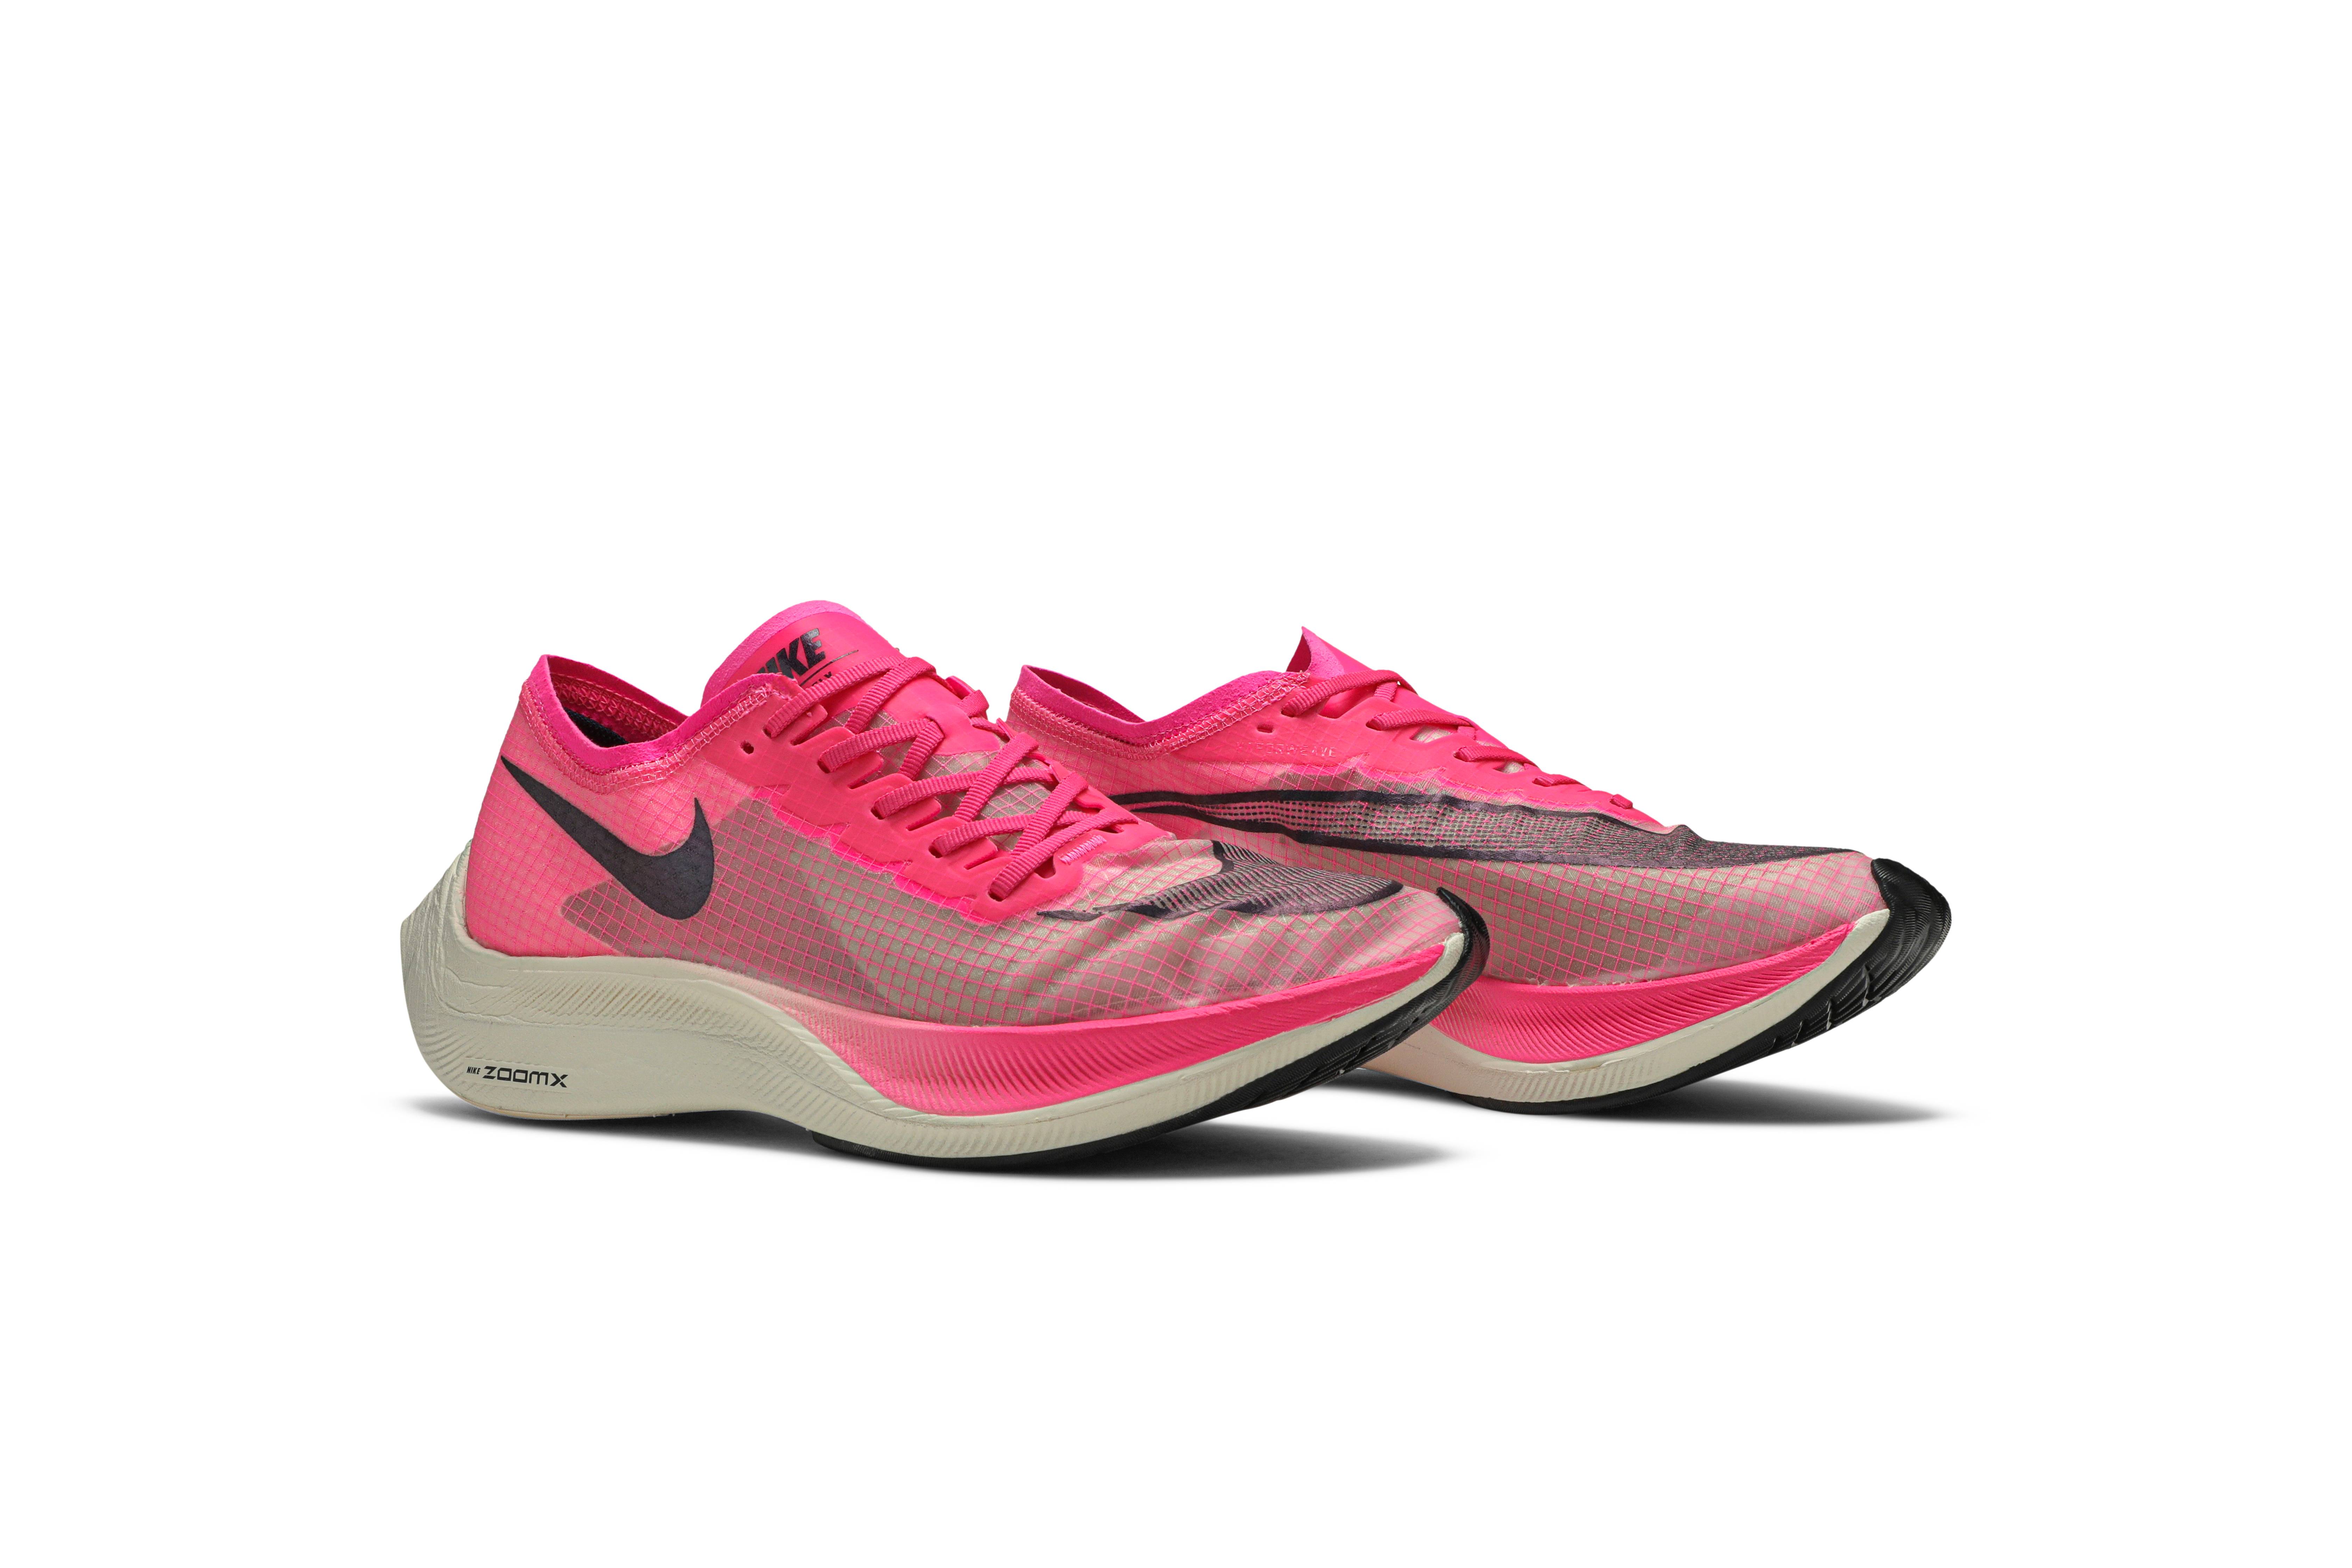 vaporfly next pink release date